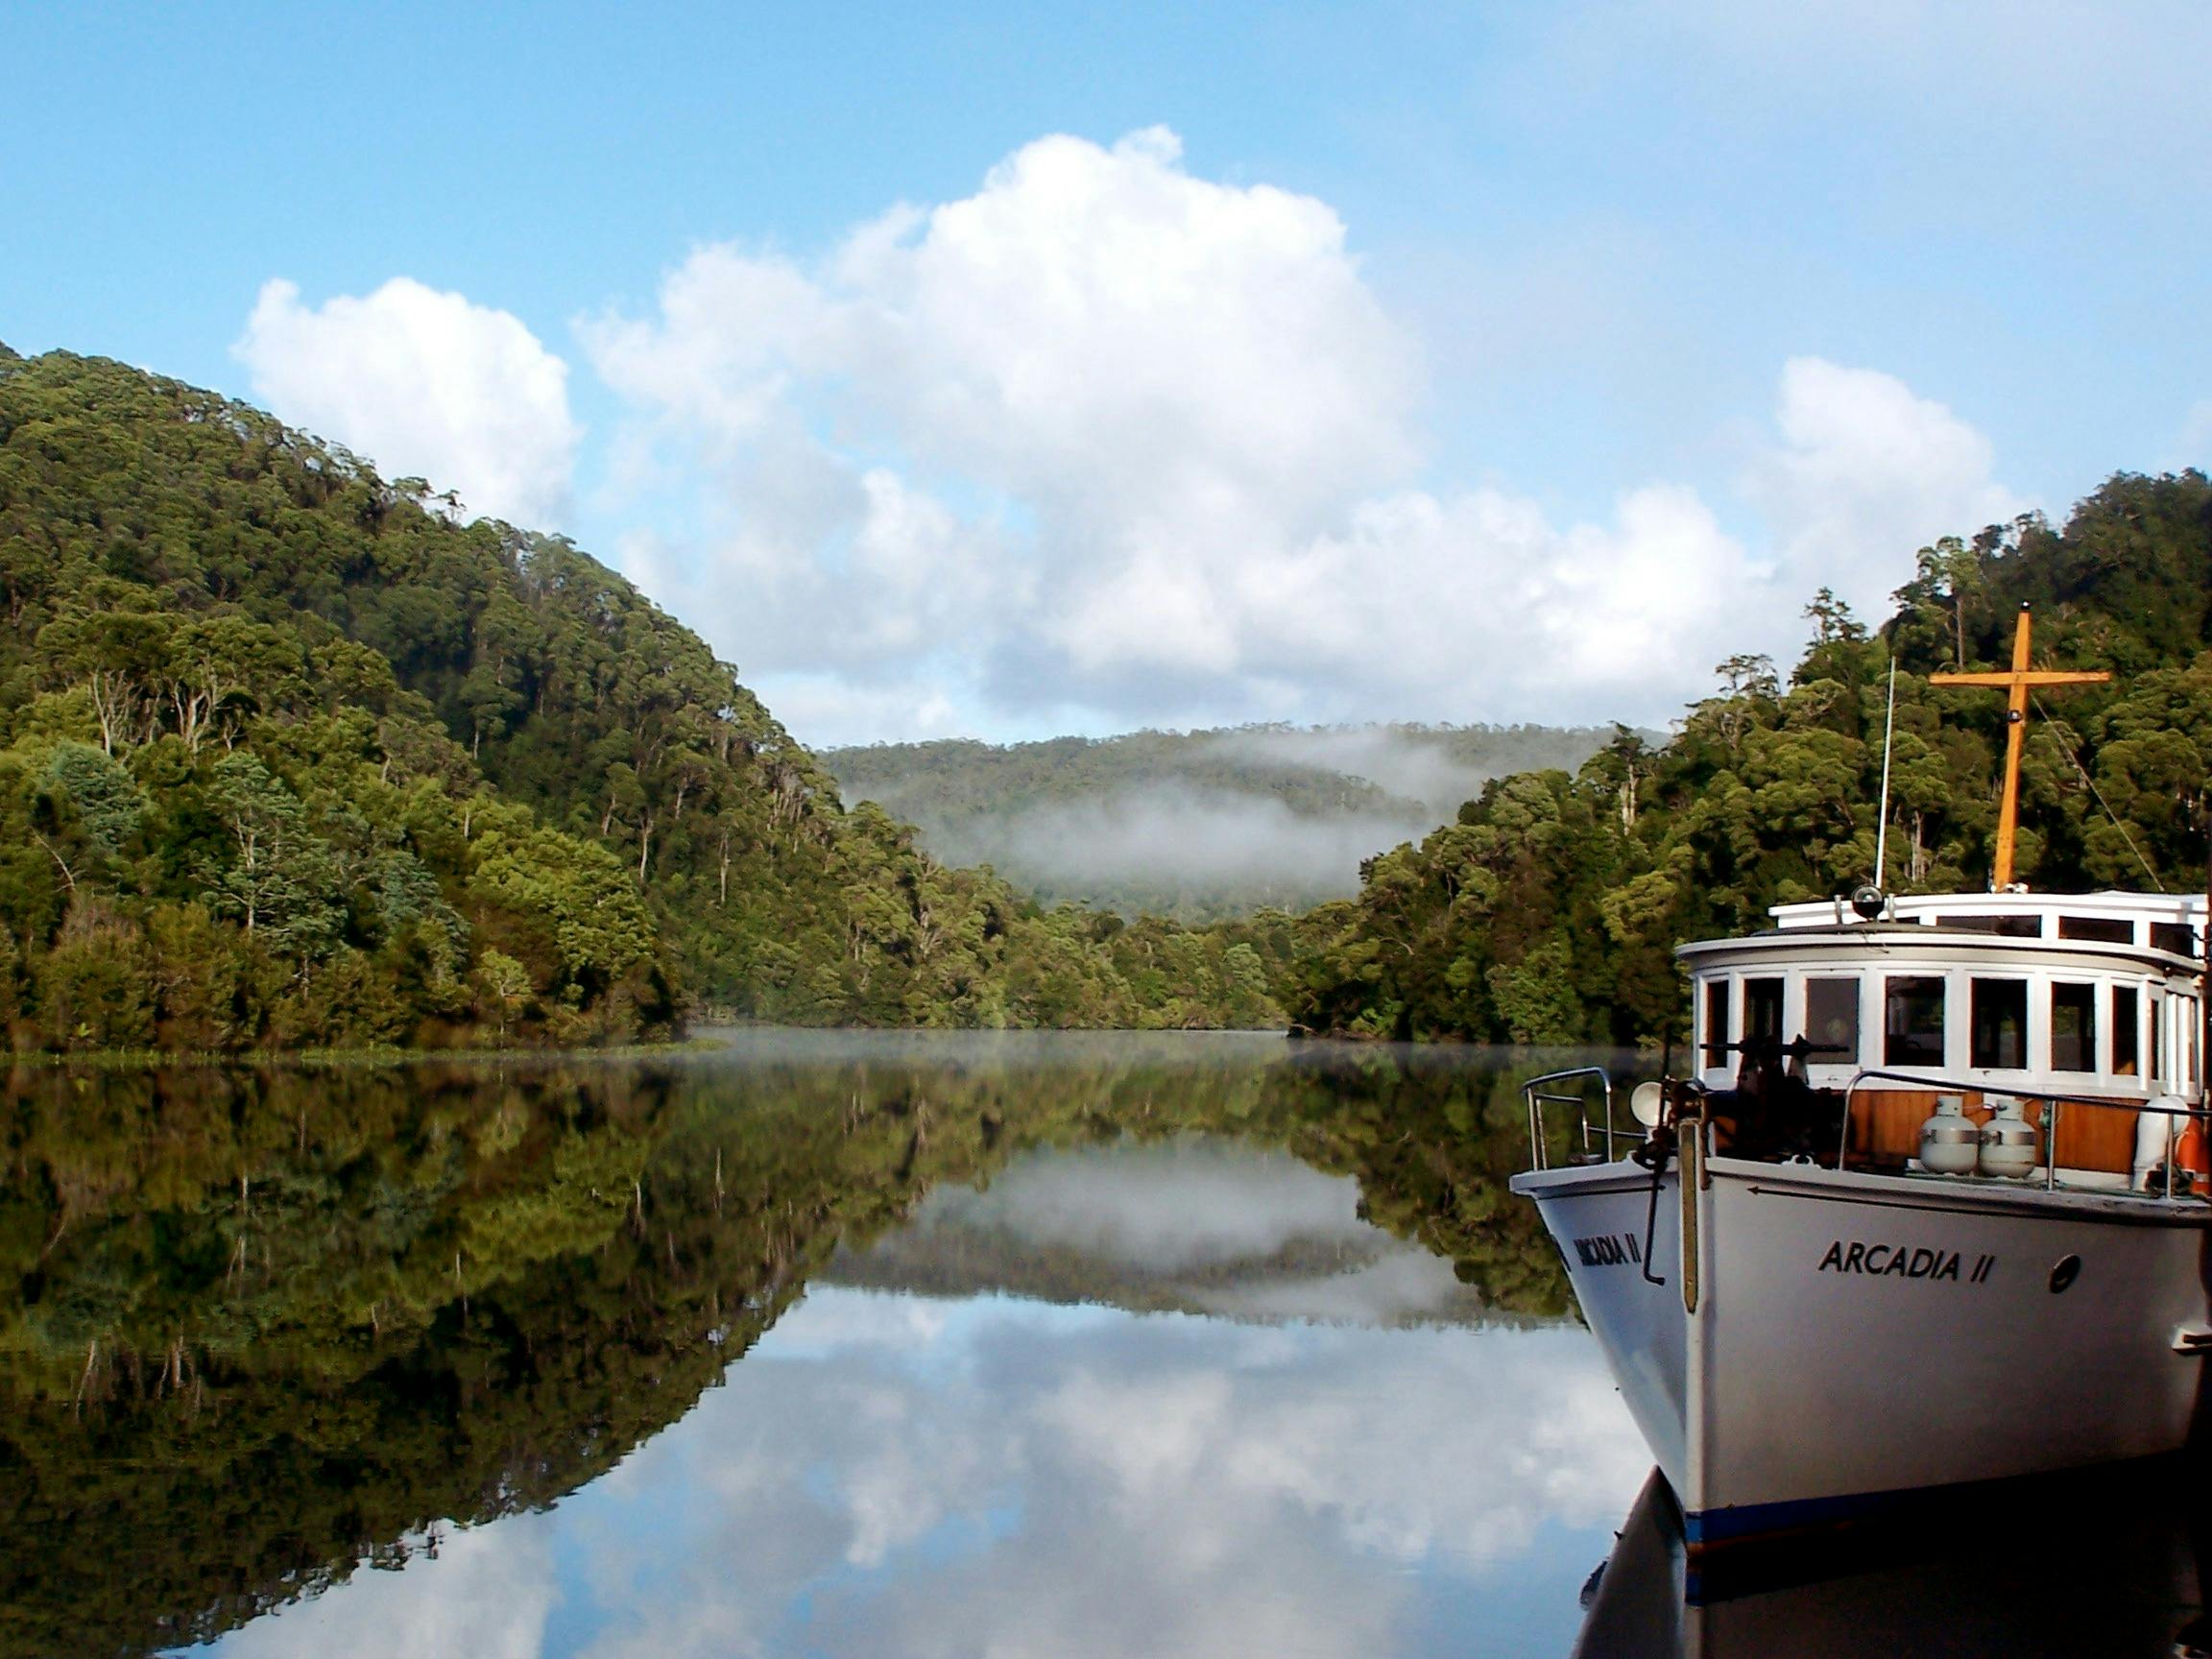 where does pieman river cruise leave from